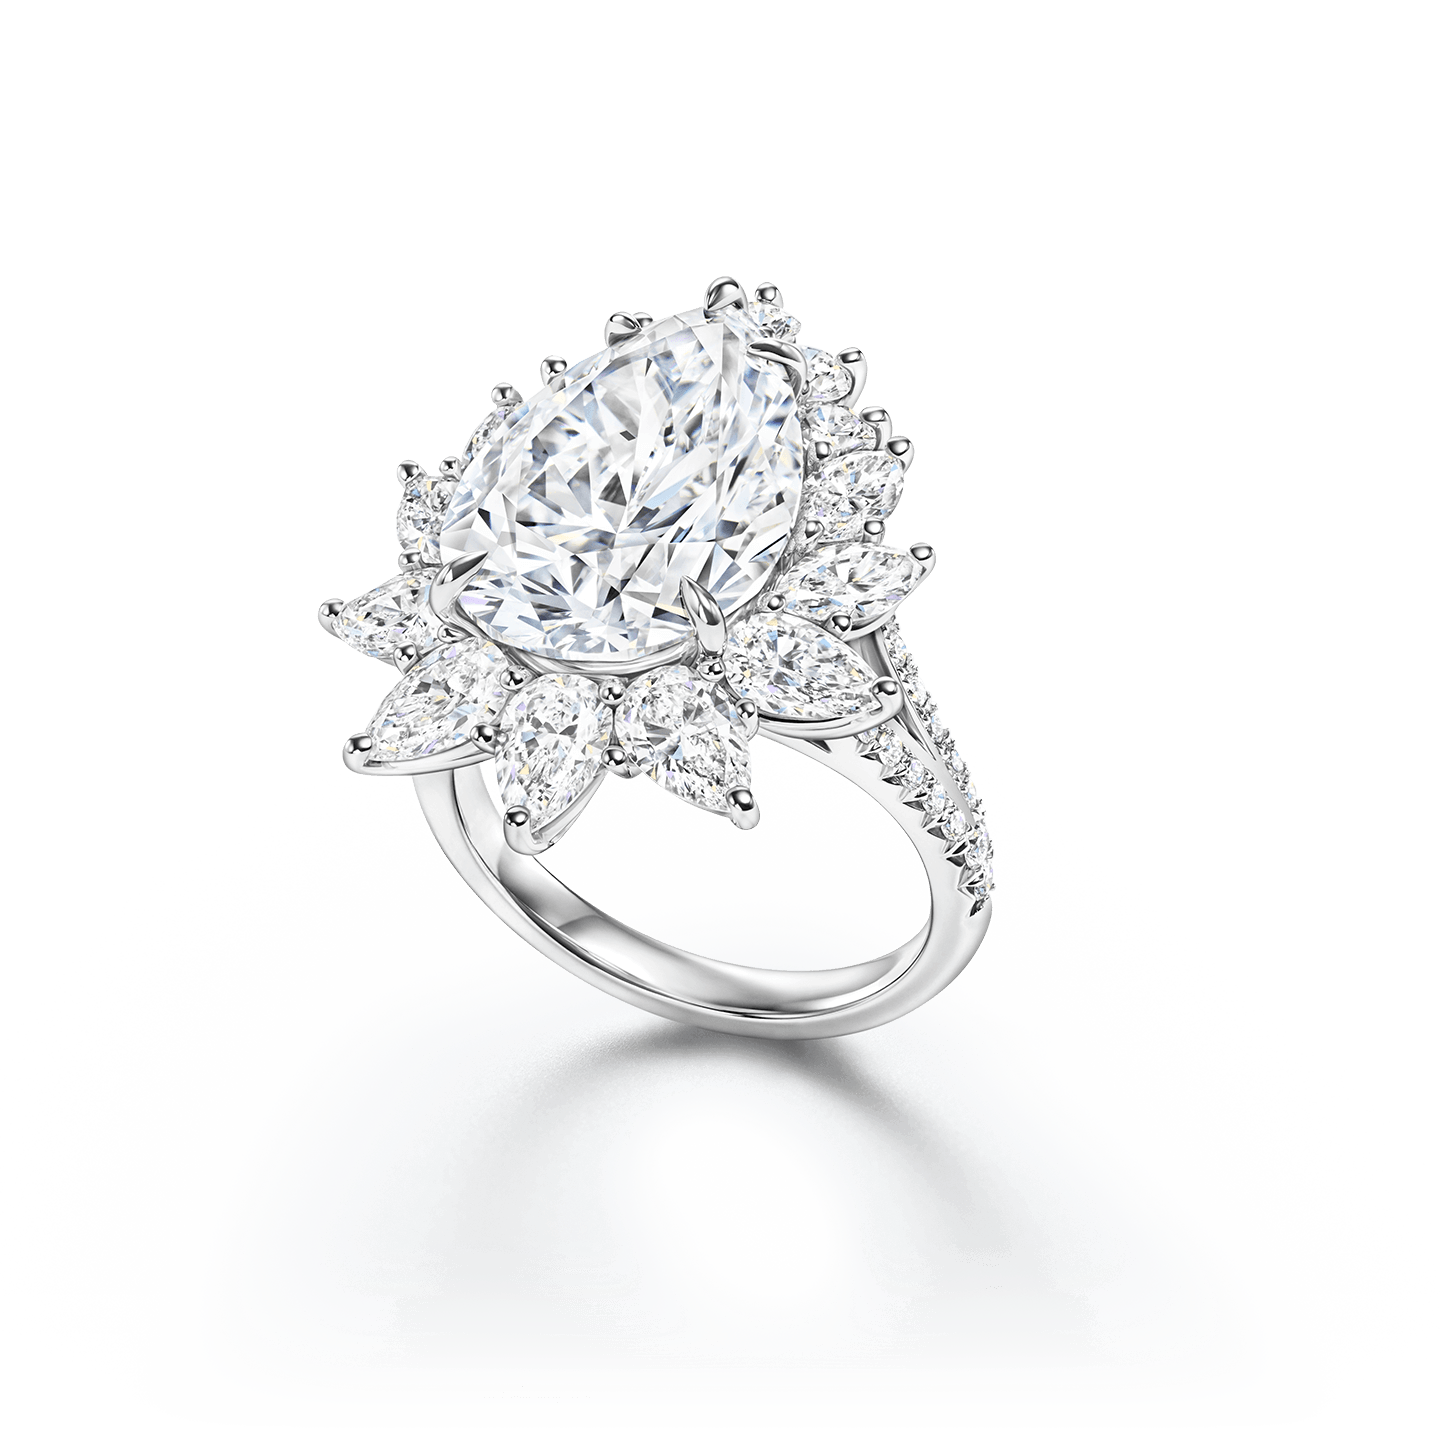 An illustrious diamond ring featuring a 6.22 carat pear-shaped diamond with 14 pear-shaped and round brilliant diamonds set in platinum